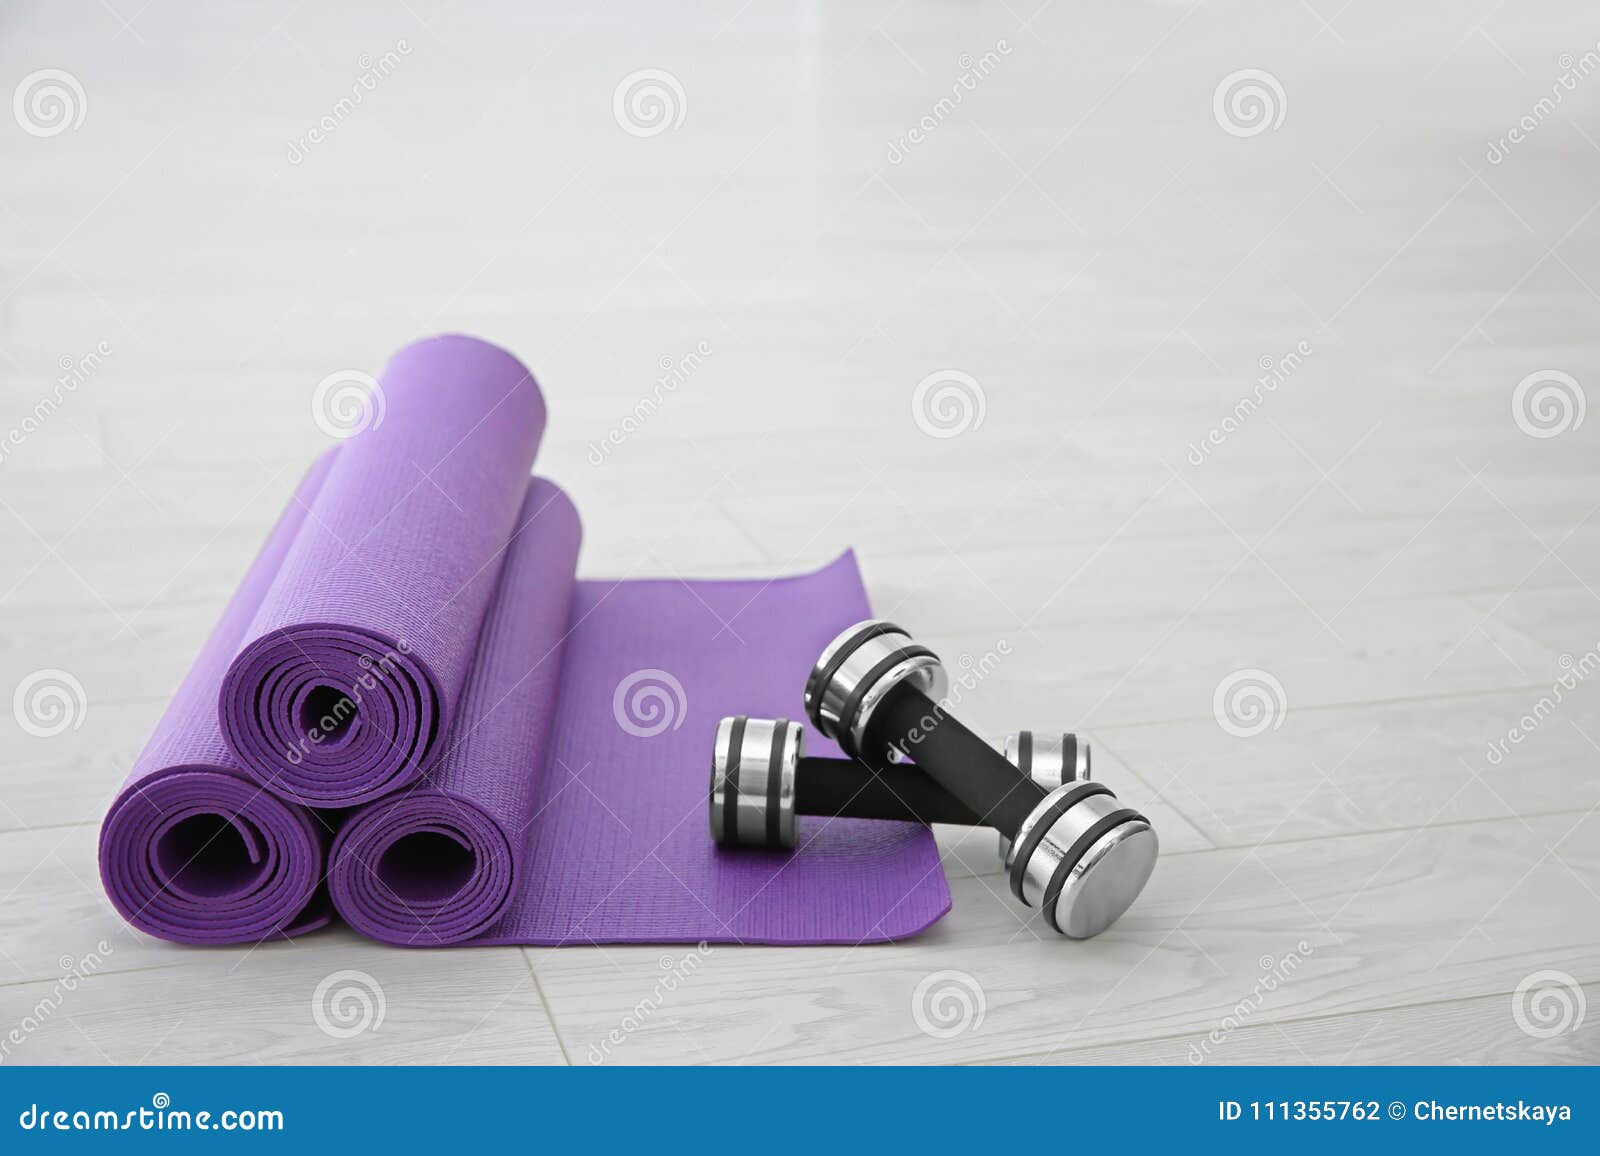 Purple Yoga Mats And Dumbbells Stock Photo - Image of object, leisure ...